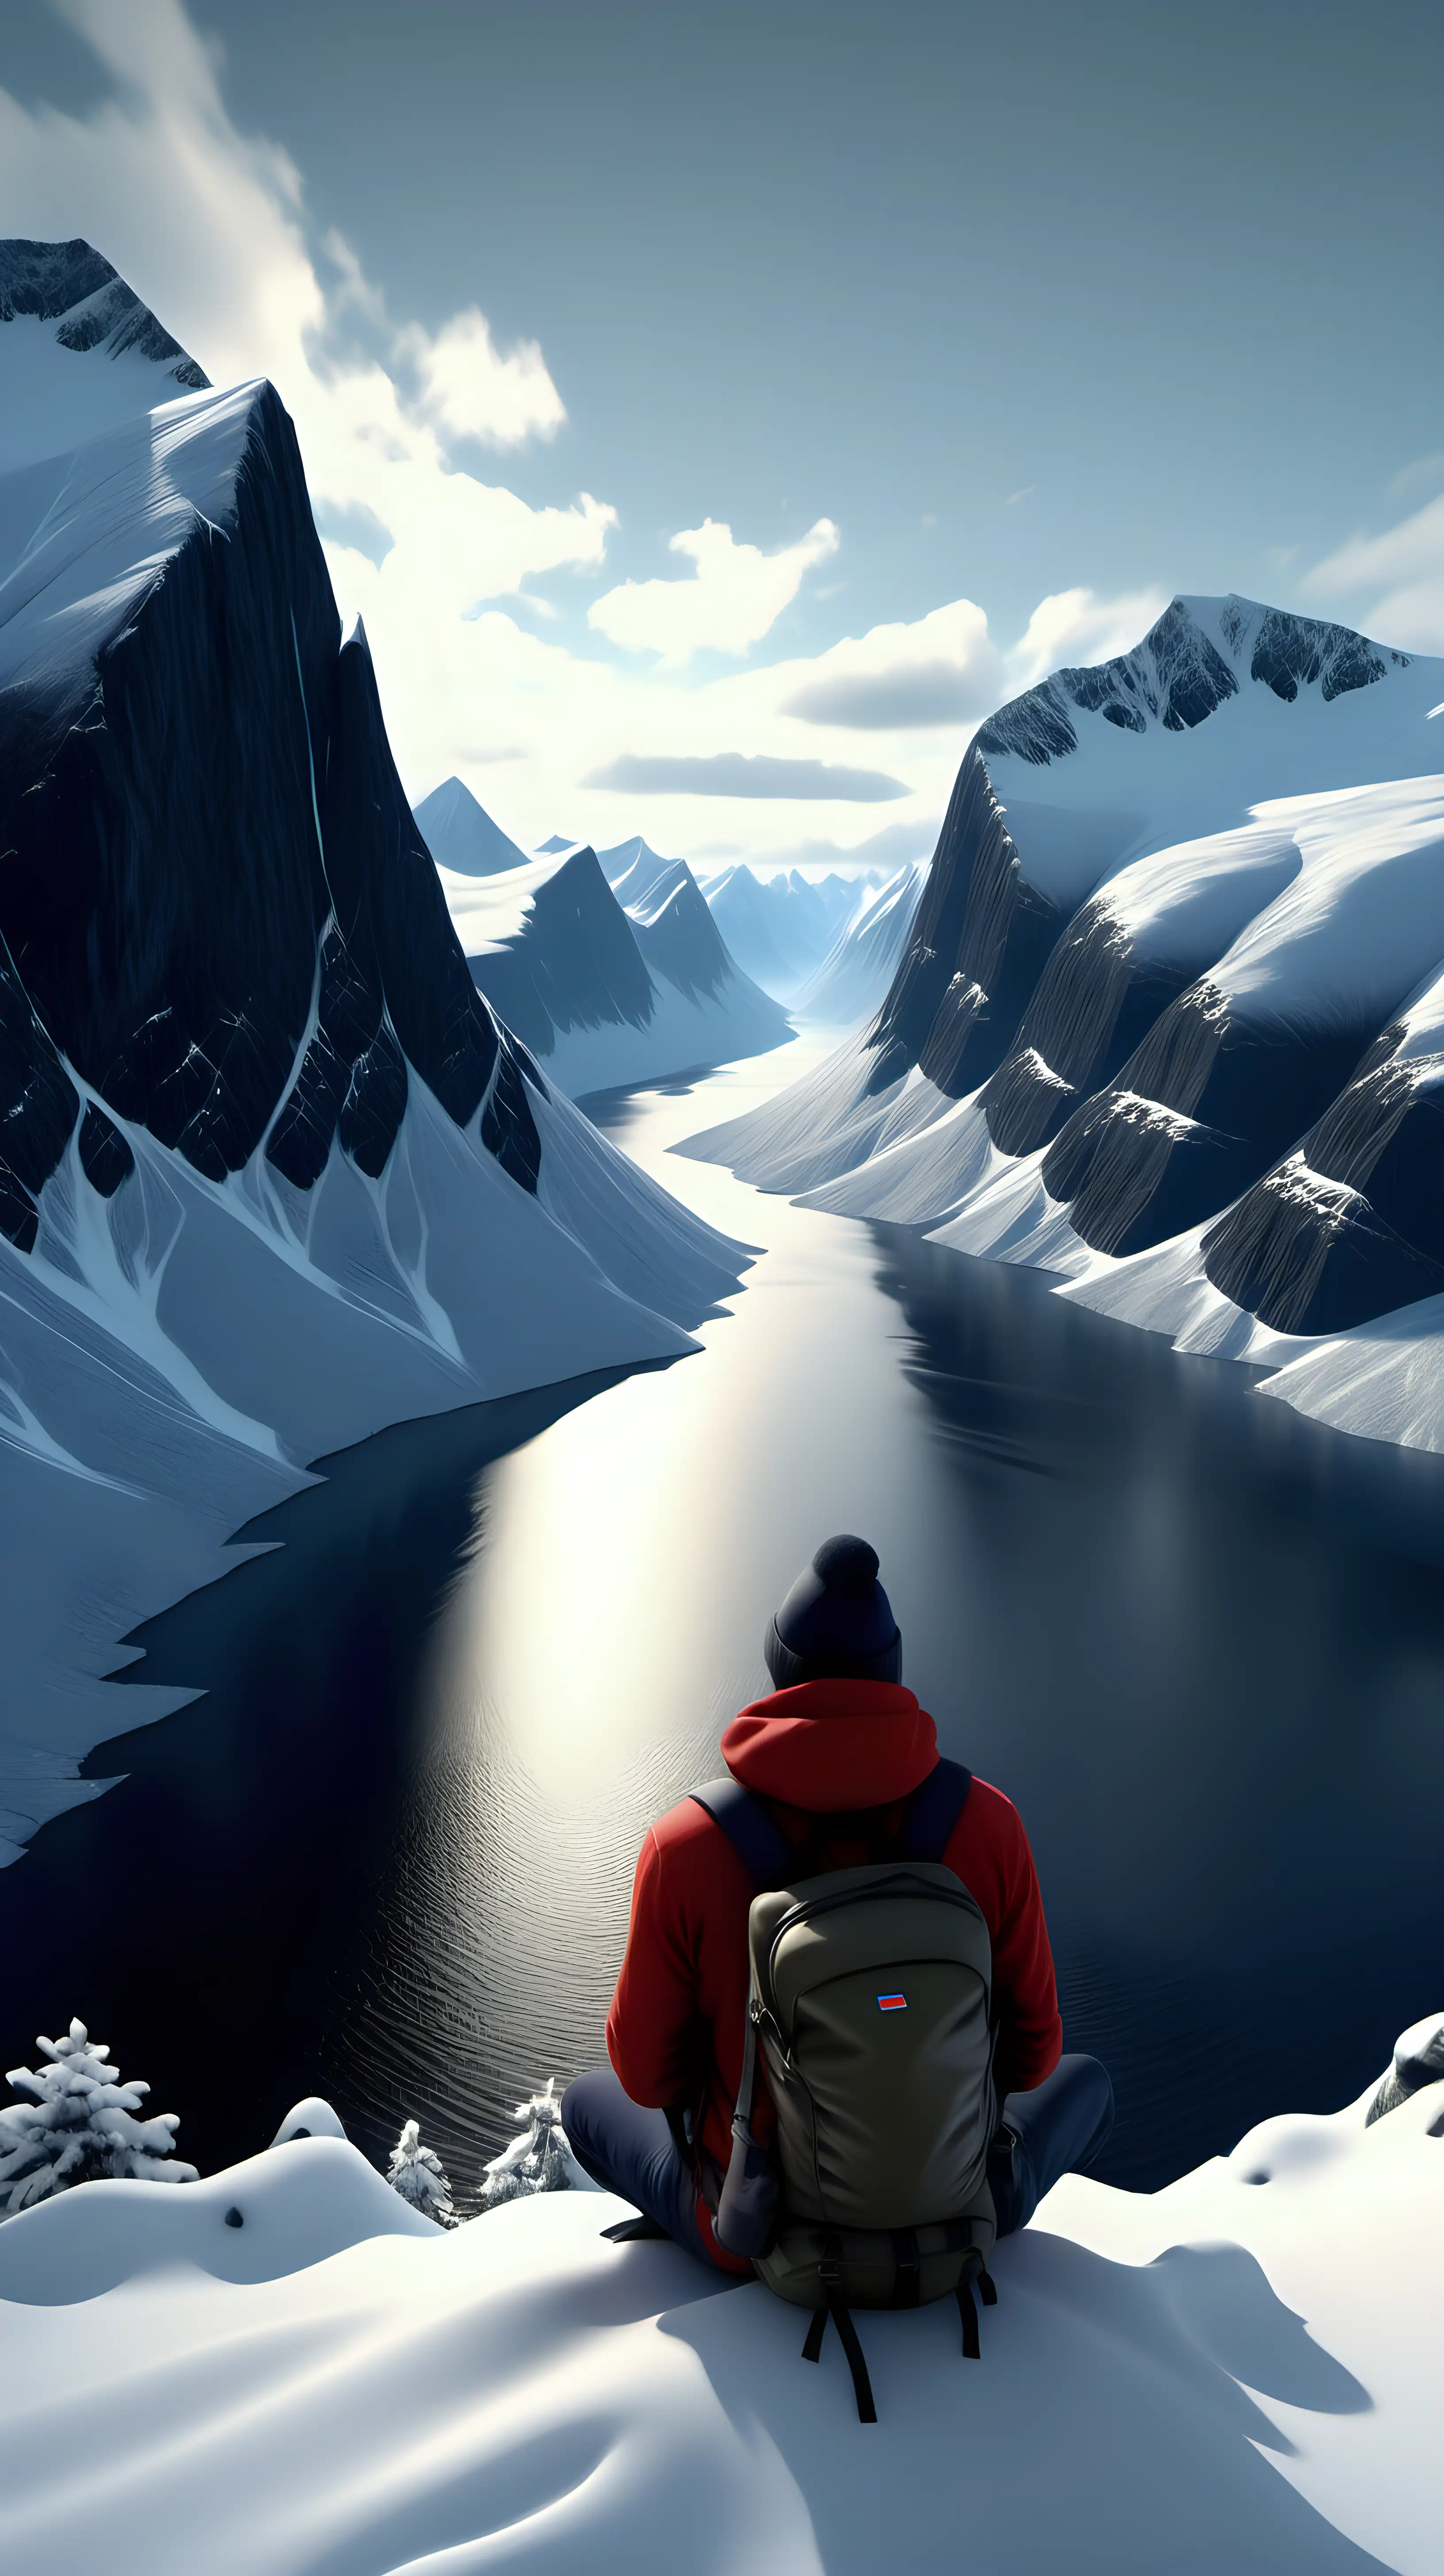 create a Norwegian deep fjord with mountains on each side, realistic and textured, snow landscape, foreground a snowy peak with a silhouette of backpack guy sitting, bald with beanie, 1080p resolution, ultra 4K, high quality, volumetric light